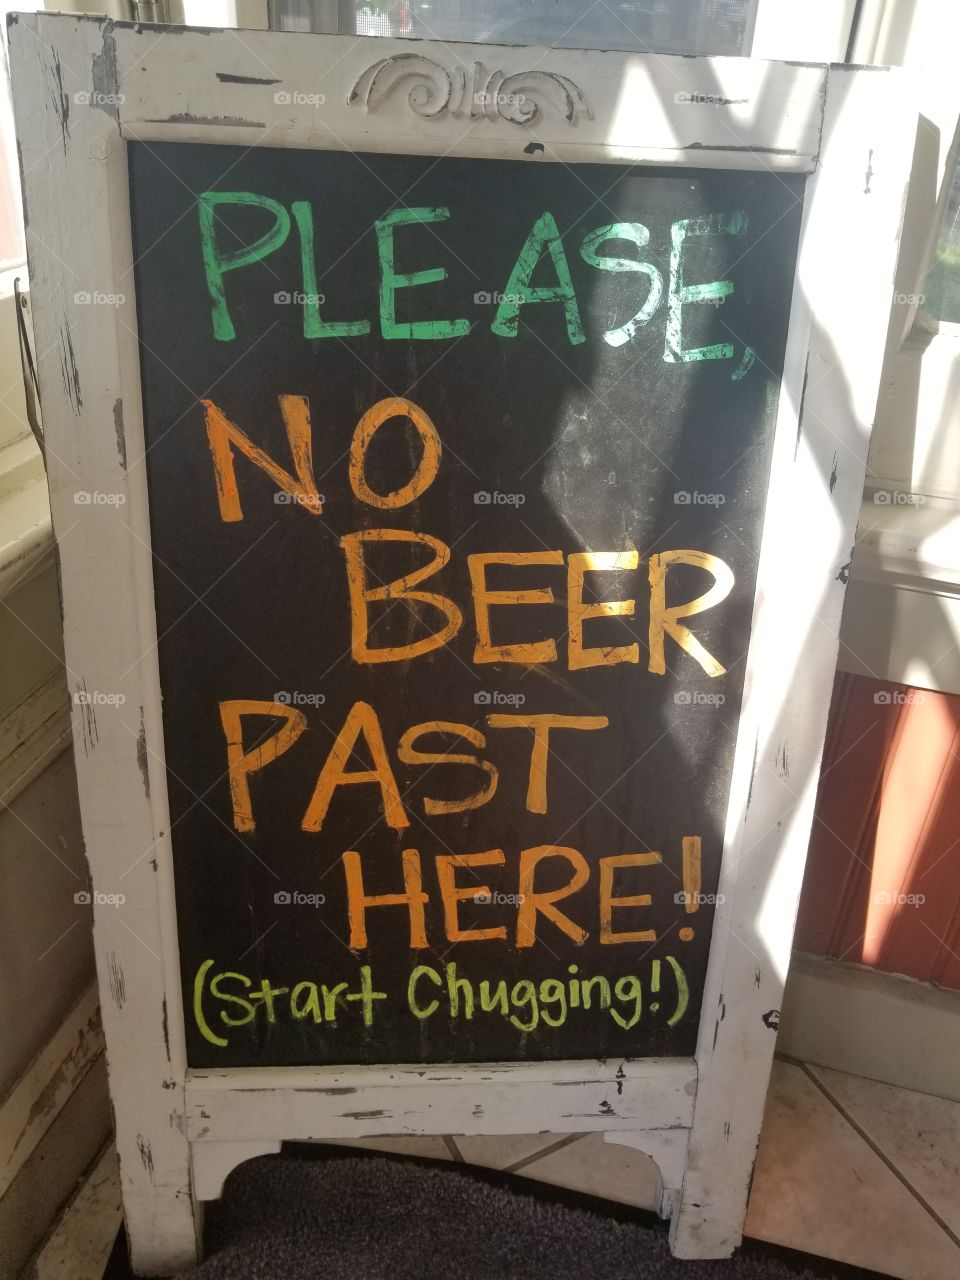 At a local brewery in Downtown Cheyenne